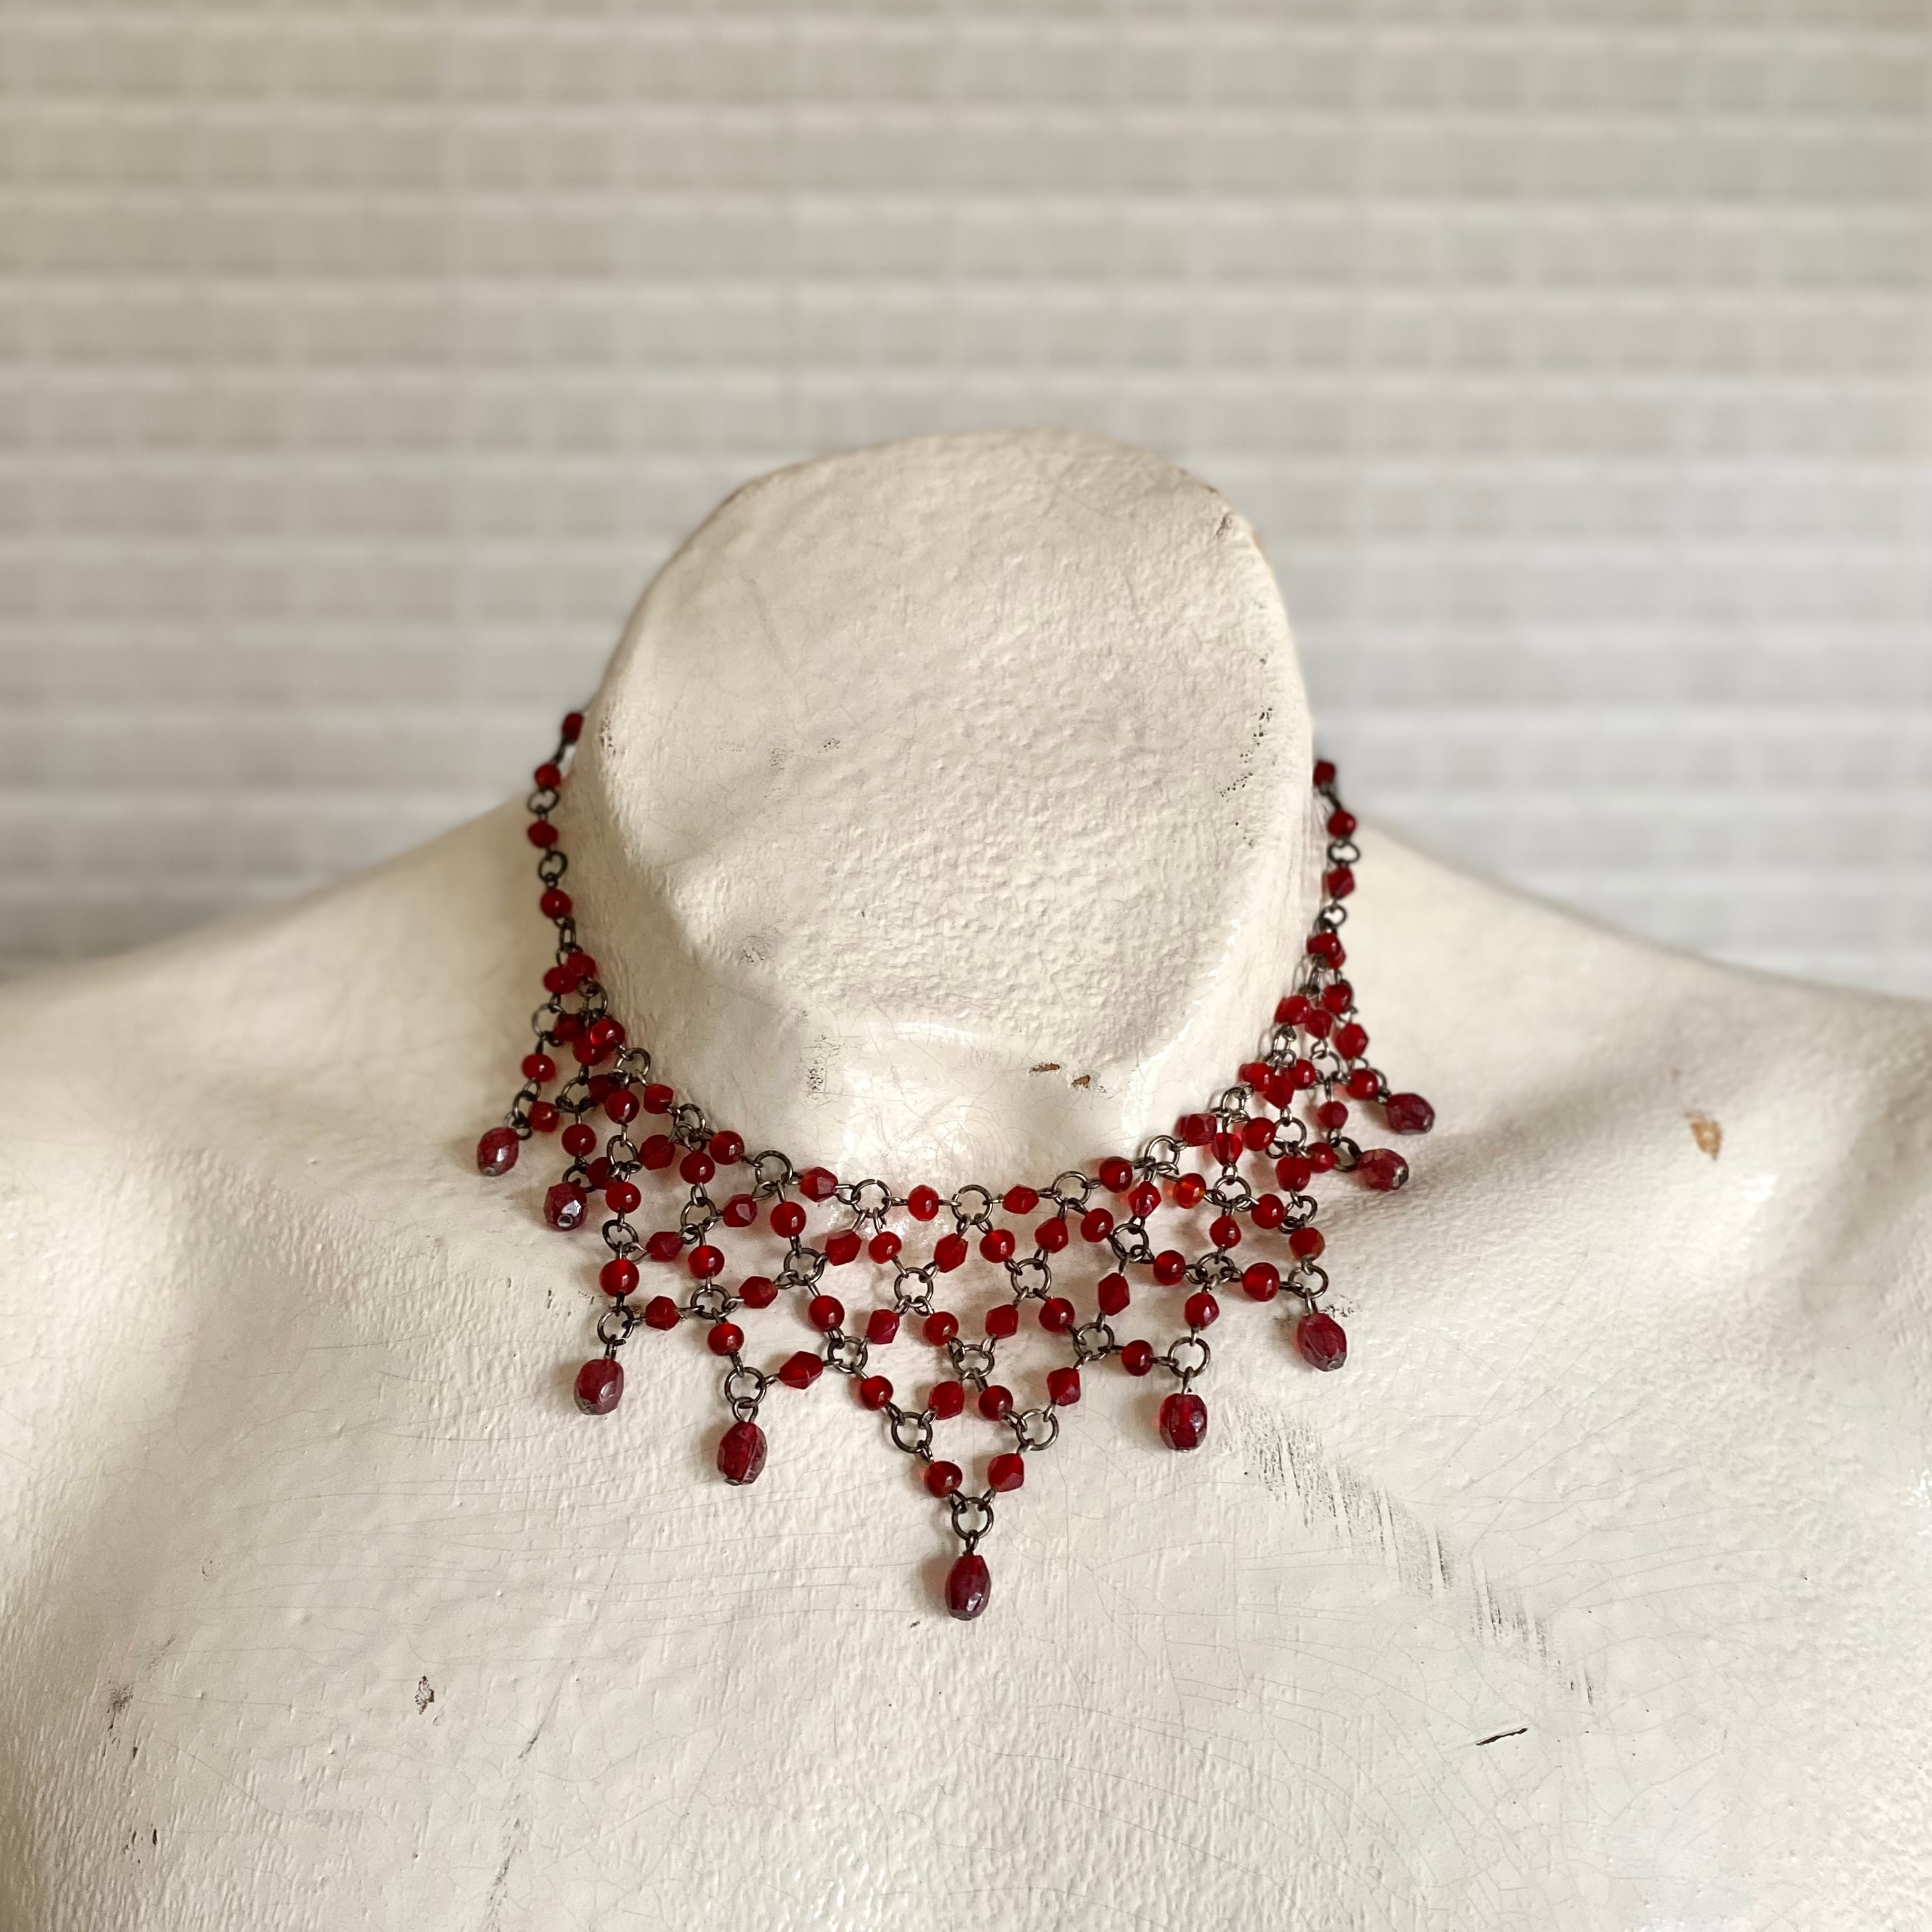 Vintage 60s Euro retro red berry glass classical necklace ユーロ ヴィンテージ アクセサリー  レトロ レッド ベリー ガラス クラシカル ネックレス